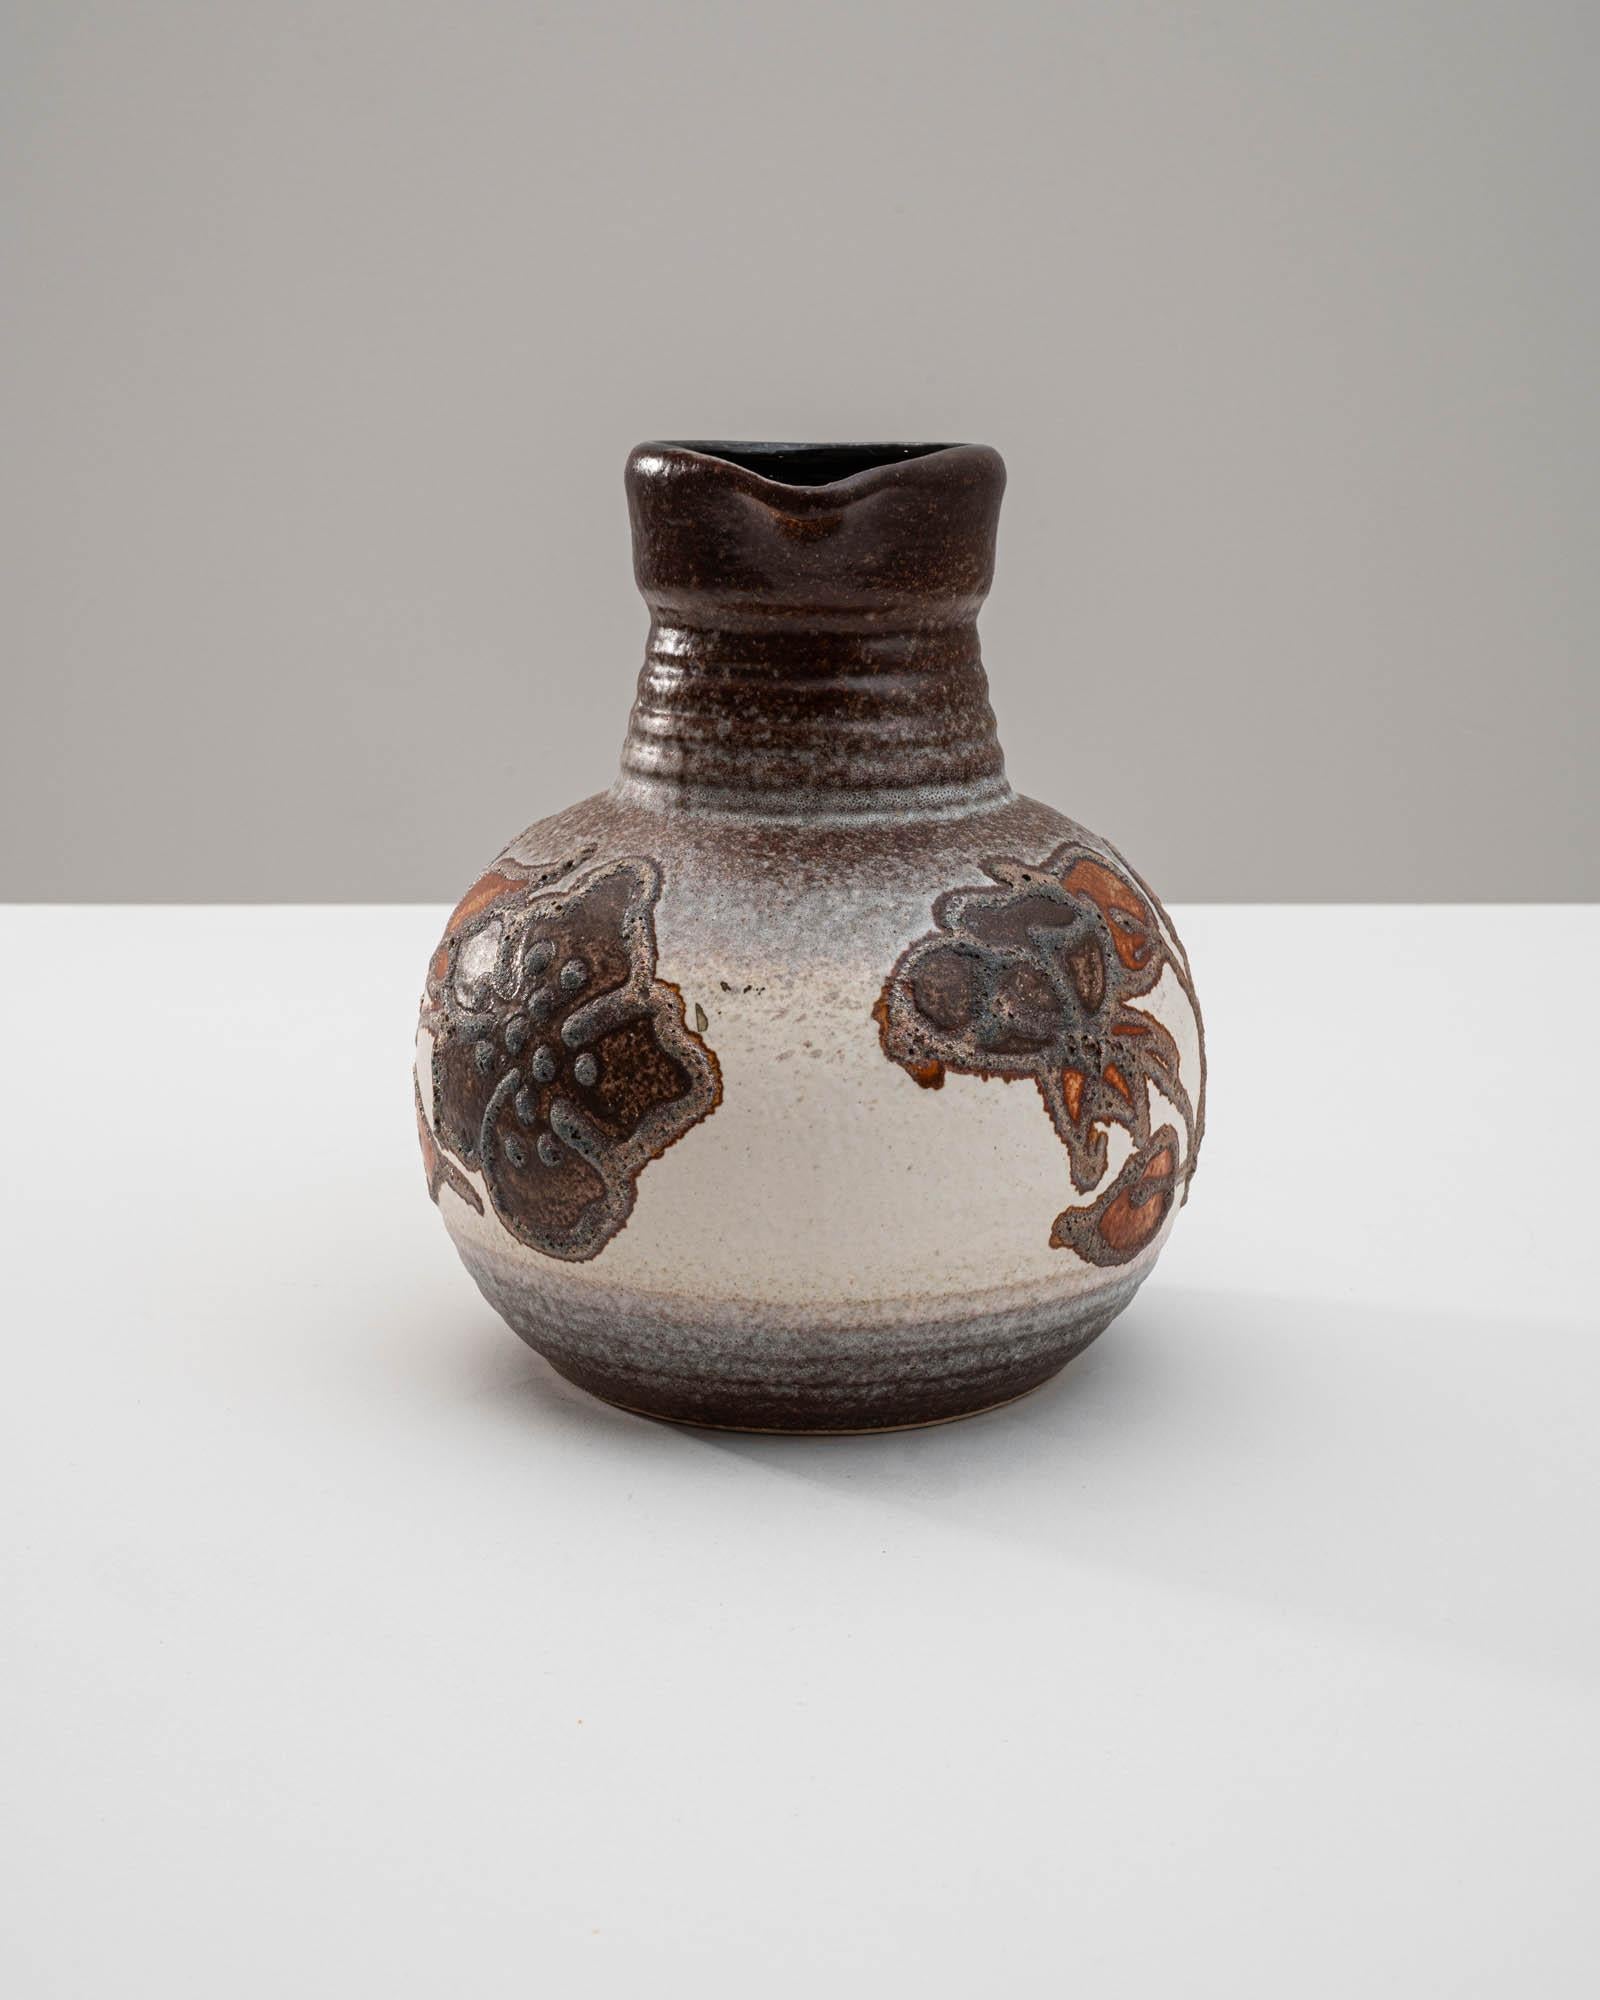 Indulge in the timeless beauty of this 1960s German “W. Germany” Ceramic Vase, characterized by its wide base adorned with an elegant floral design. The transition from a elegant crème at the base to a rich brown hue towards the top adds depth and